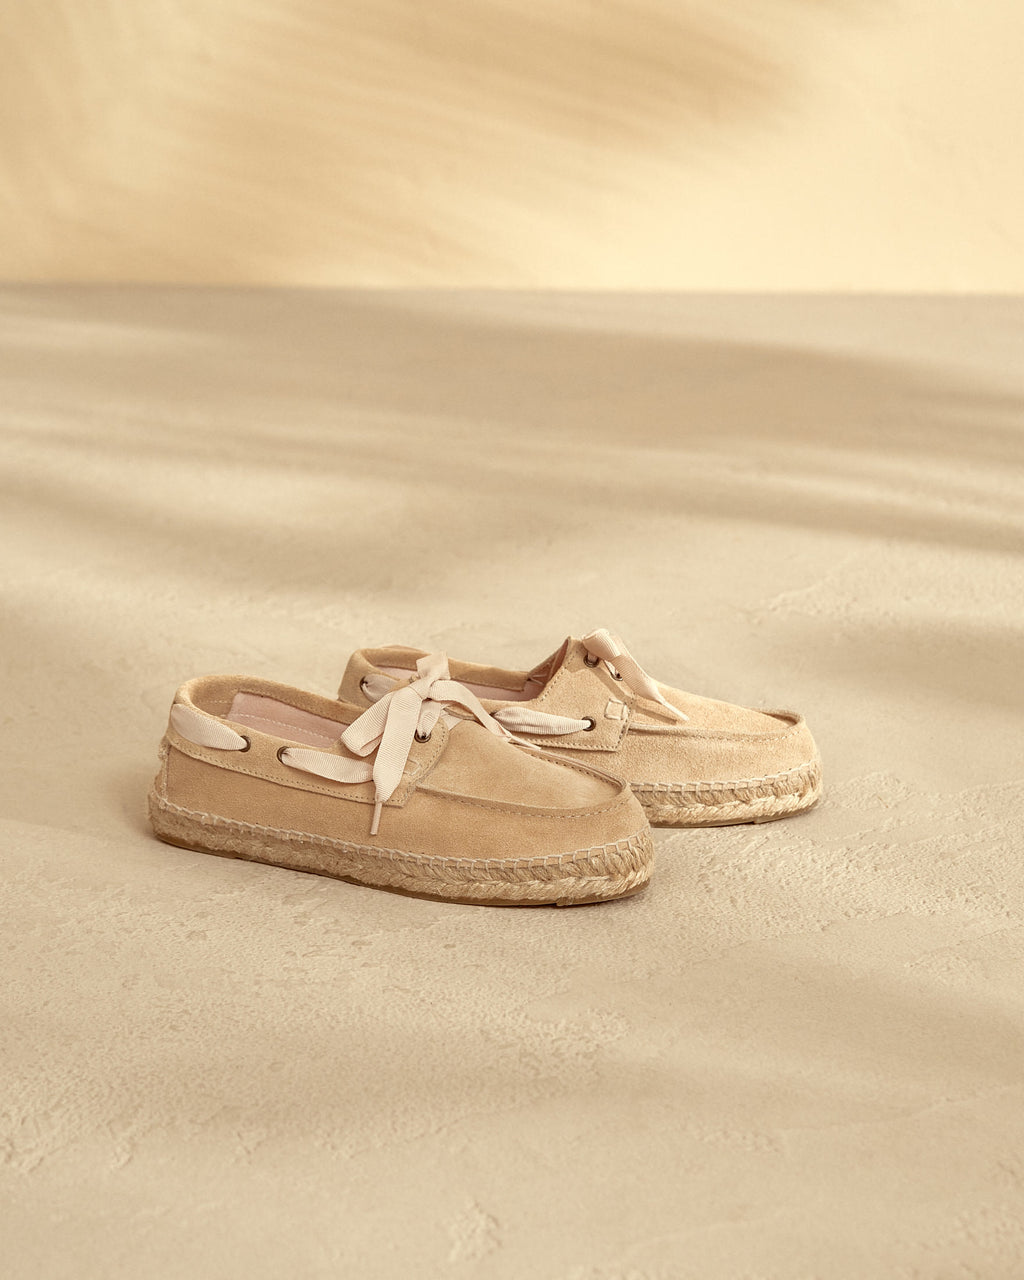 Suede Boat Shoes - Hamptons - Champagne Beige